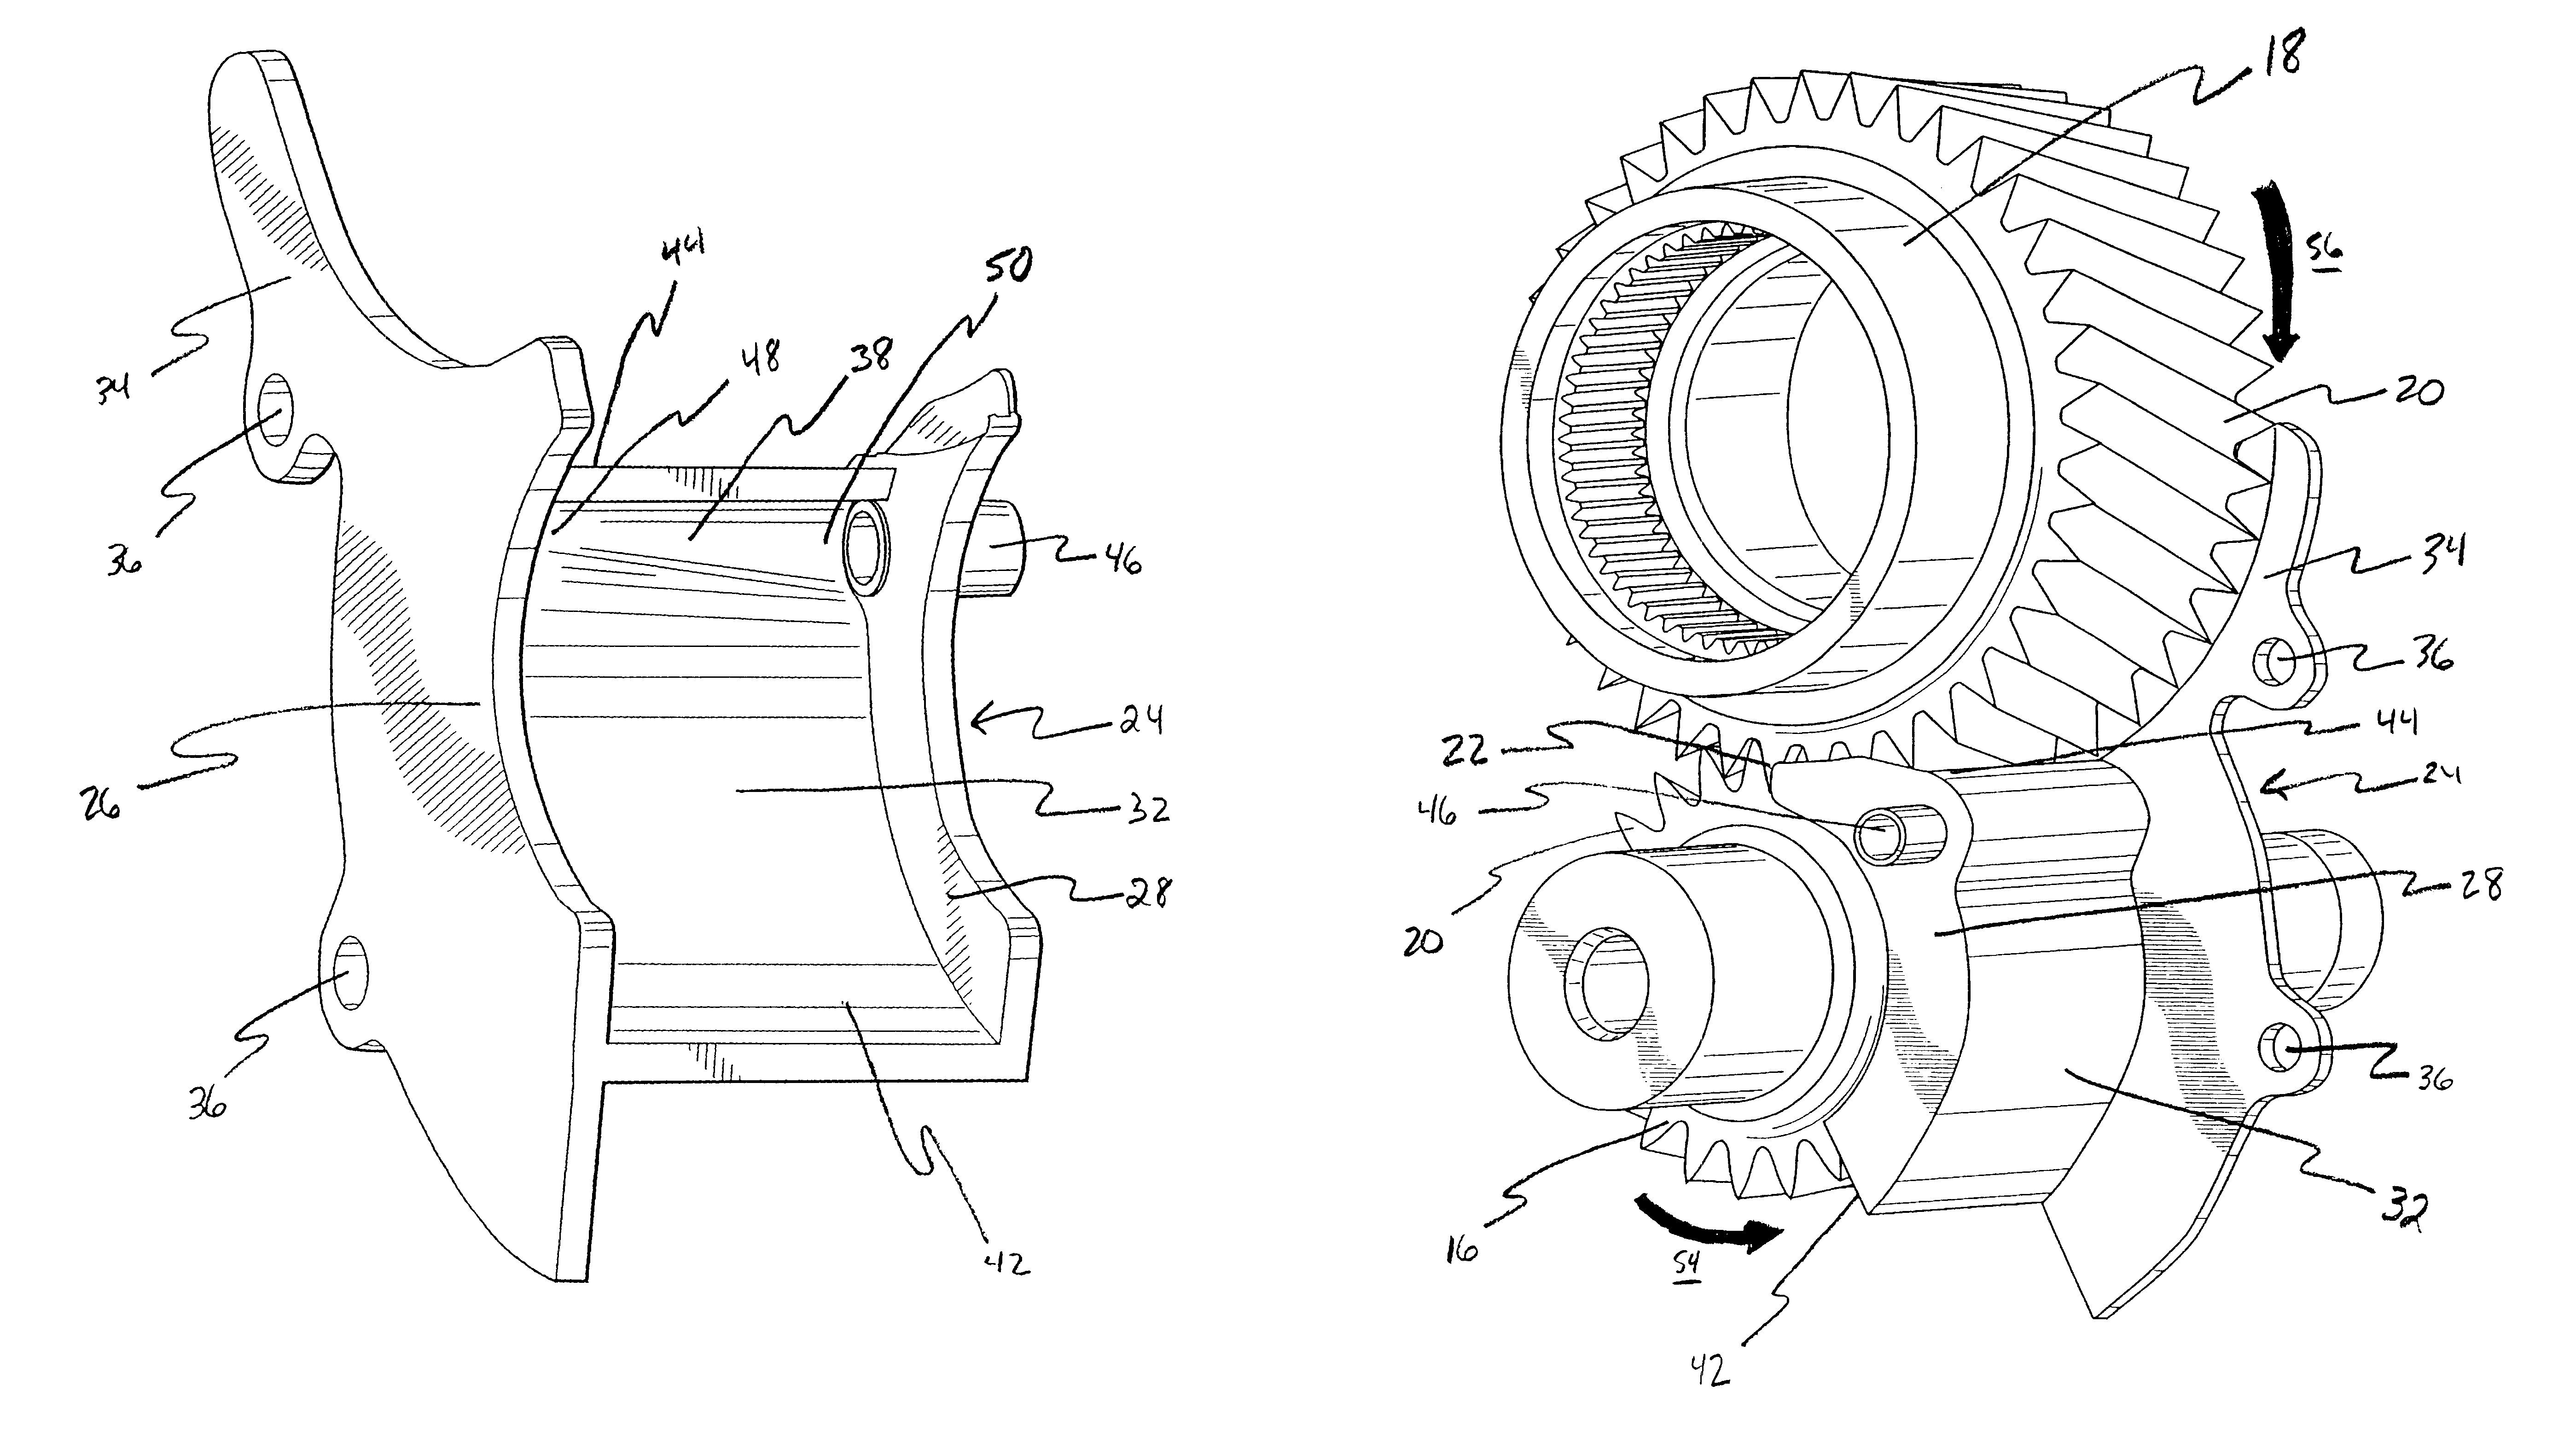 Fluid pump mechanism for use in existing helical gearsets